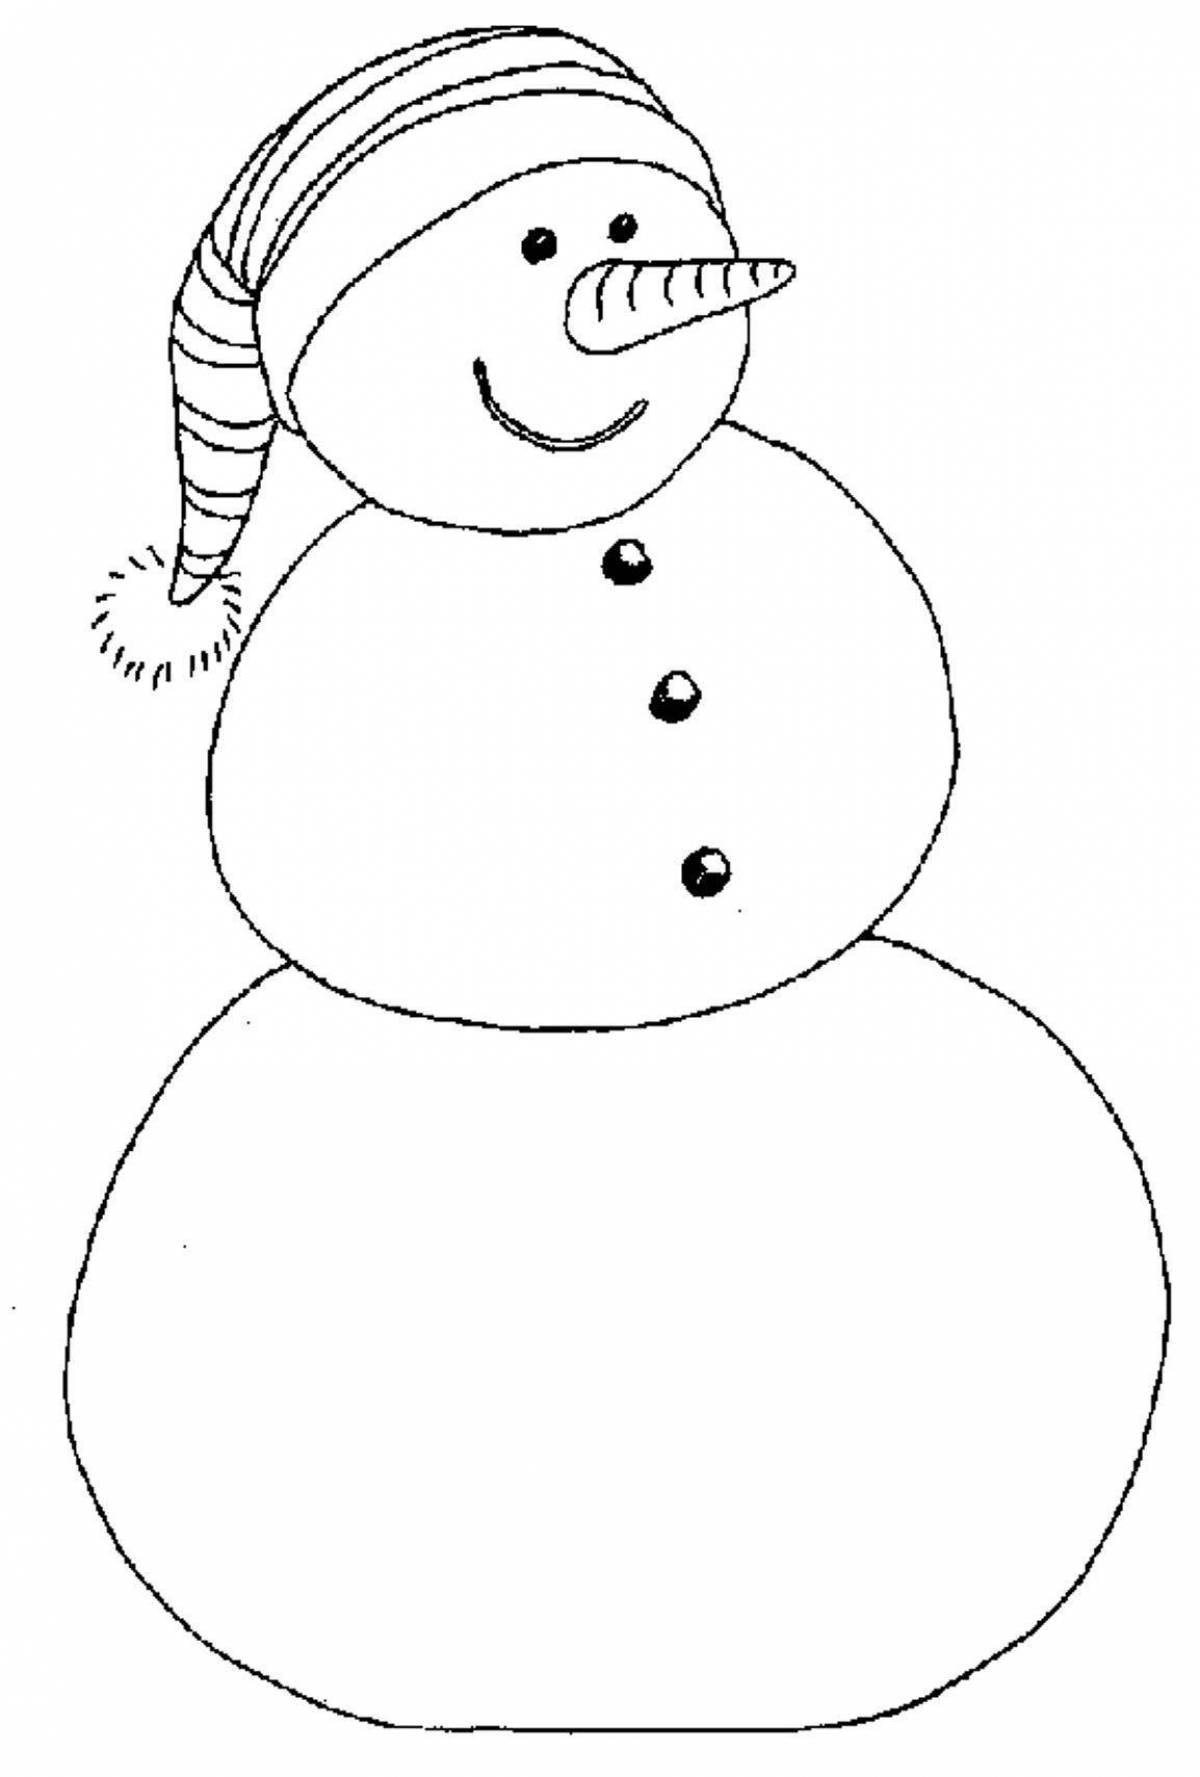 Coloring book of a cheerful children's snowman